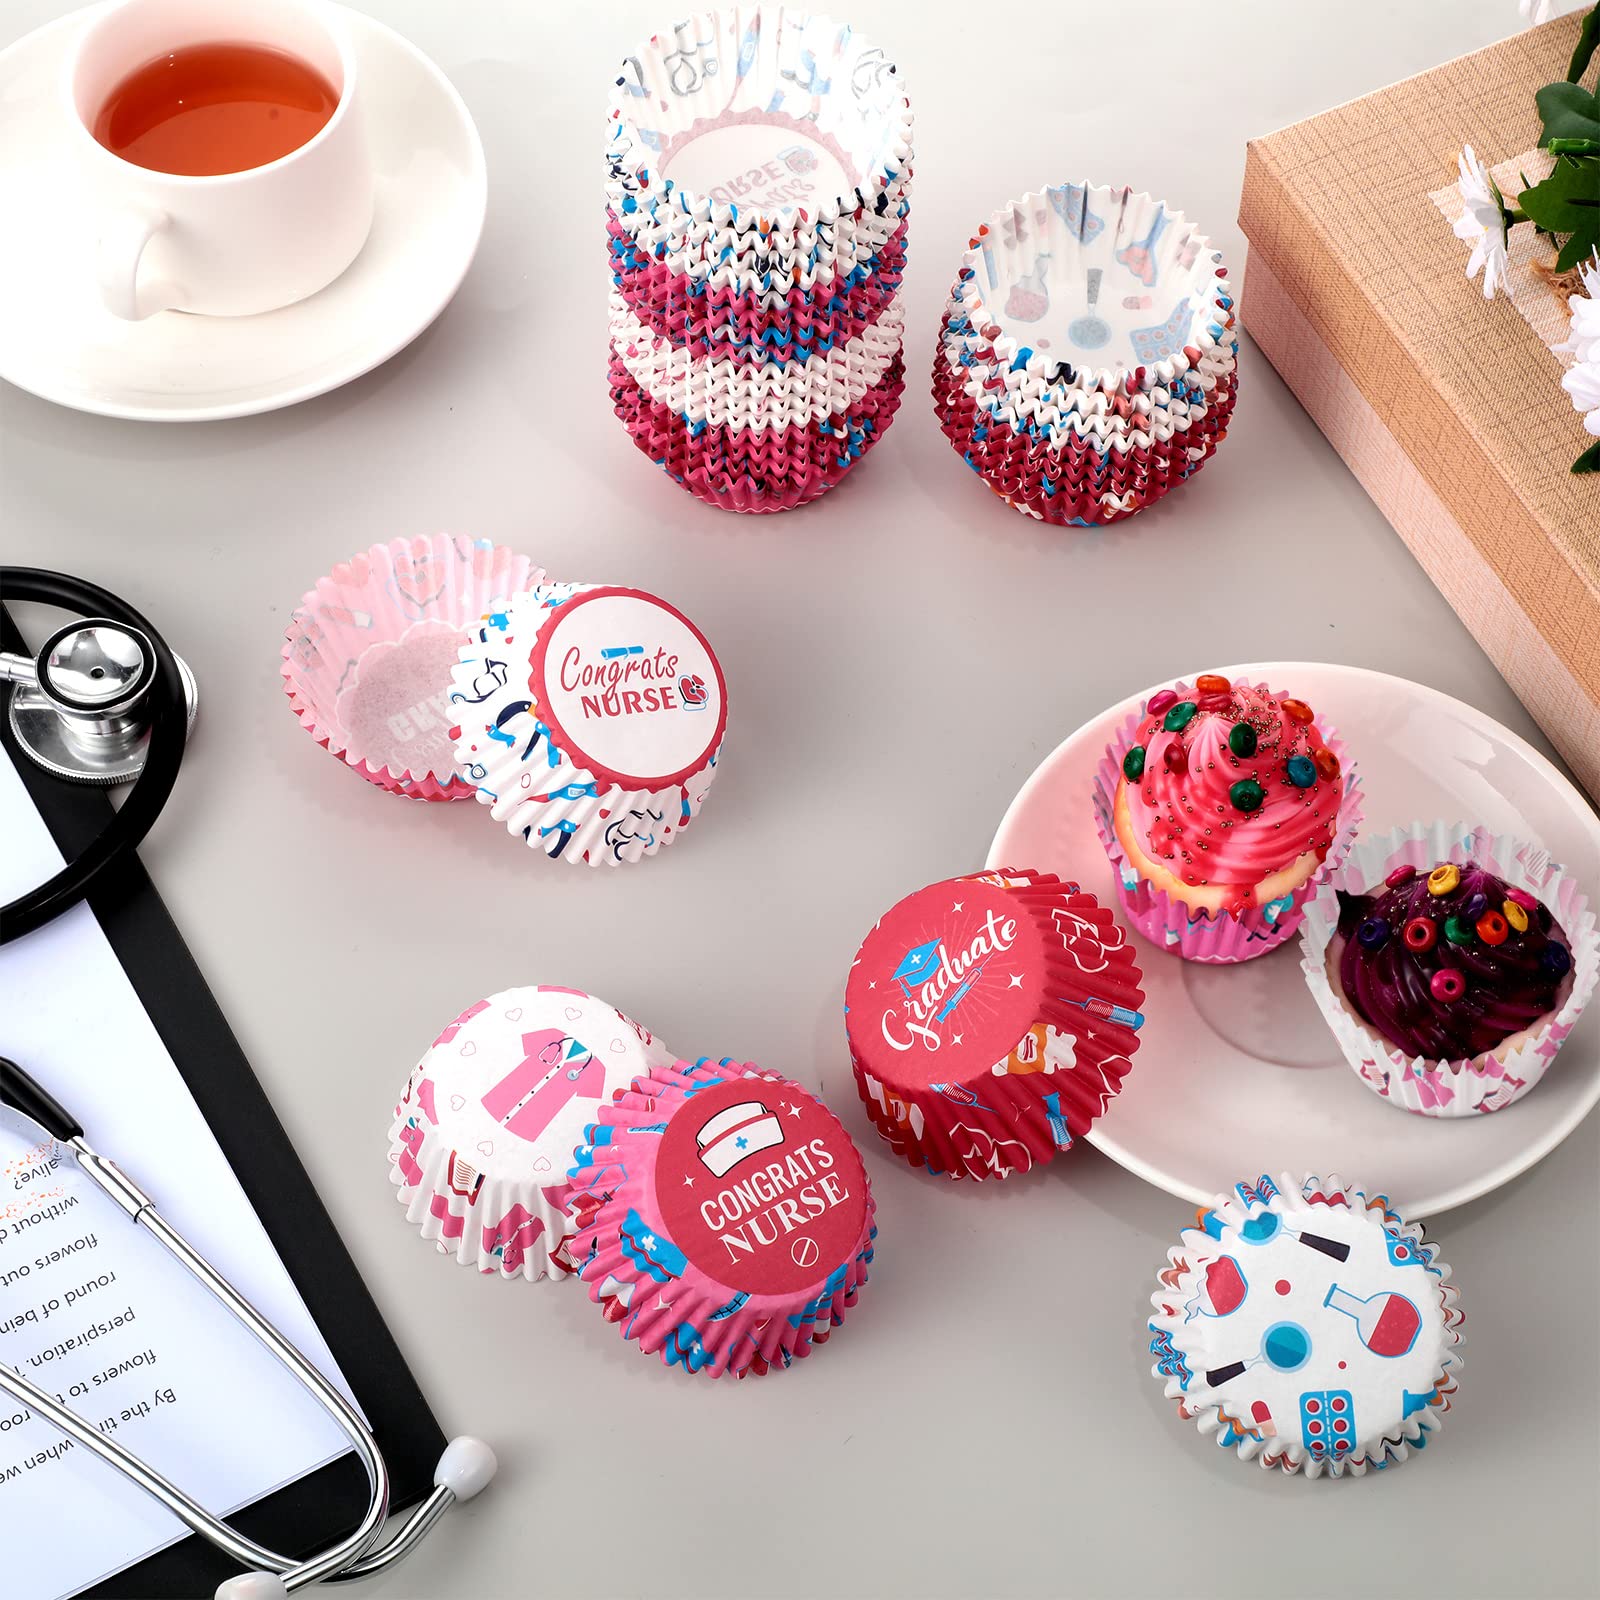 600 Count Nurse Graduation Cupcake Liners Nurse's Hat Stethoscope Thermometer Cupcake Baking Cups Cupcake Paper Wrappers Wraps Muffin Case Trays for Nurse Graduation Party Supplies